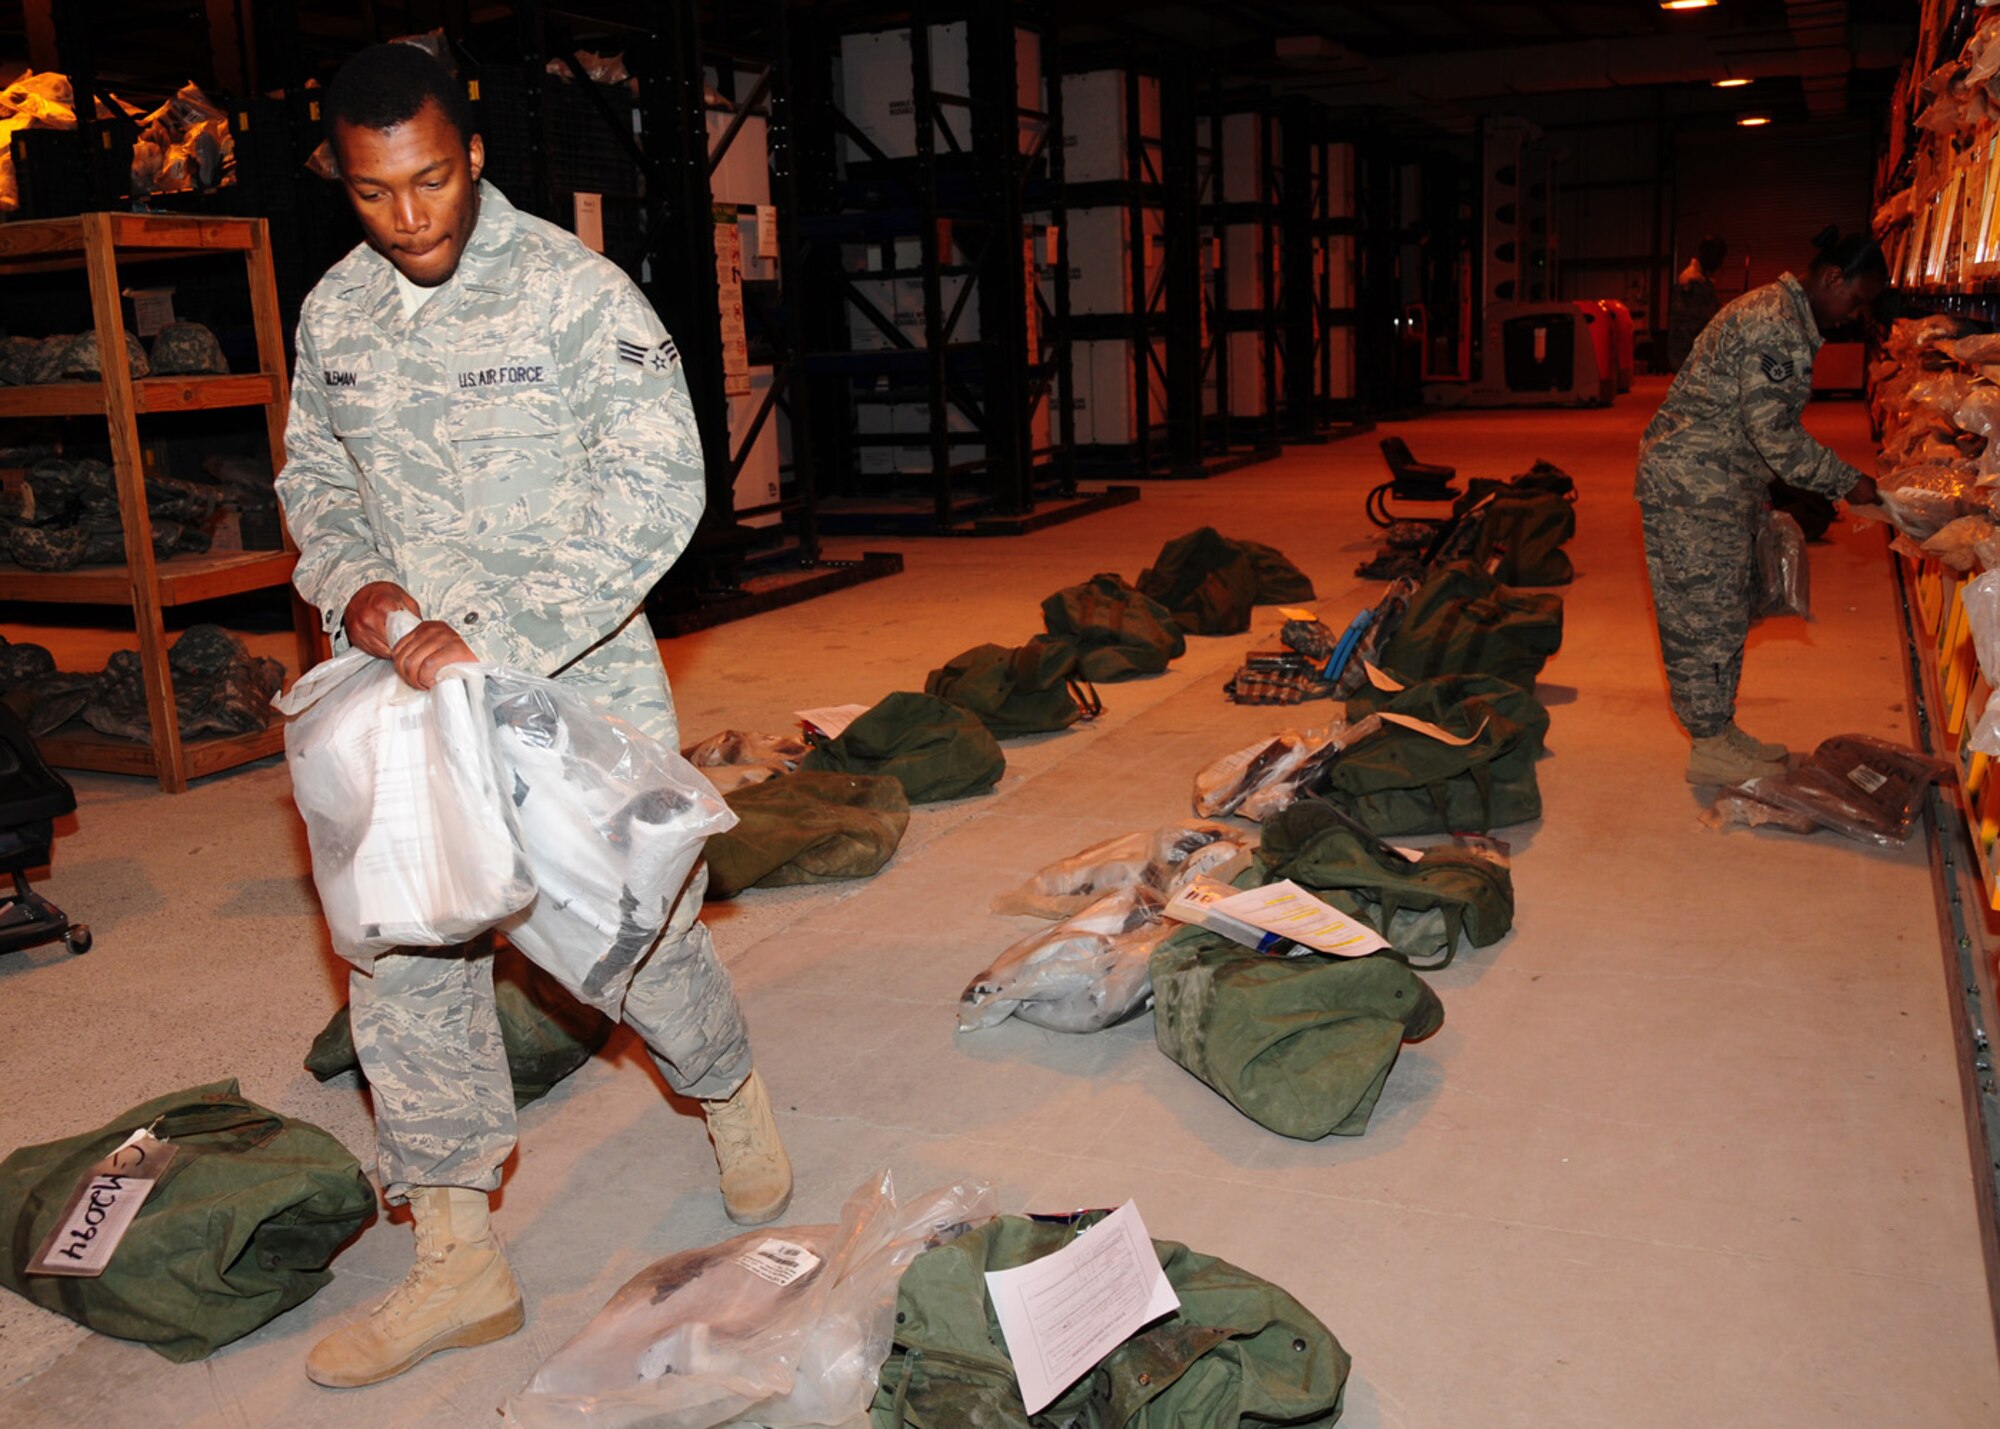 SOUTHWEST ASIA -- Senior Airman Antoine Coleman, 386th Expeditionary Logistics Readiness Squadron, disseminates chemical warfare boots by size to designated bags at the 386th Expeditionary Theater Distribution Center at an air base in Southwest Asia, May 29. Along with issuing mobility equipment, the ETDC provides weapons courtesy storage for Air Force personnel who need to store weapons for the duration of their deployment. Airman Coleman is deployed from Seymour Johnson Air Force Base, N.C., and is originally from Fayetteville, N.C. (U.S. Air Force photo/ Senior Airman Courtney Richardson)